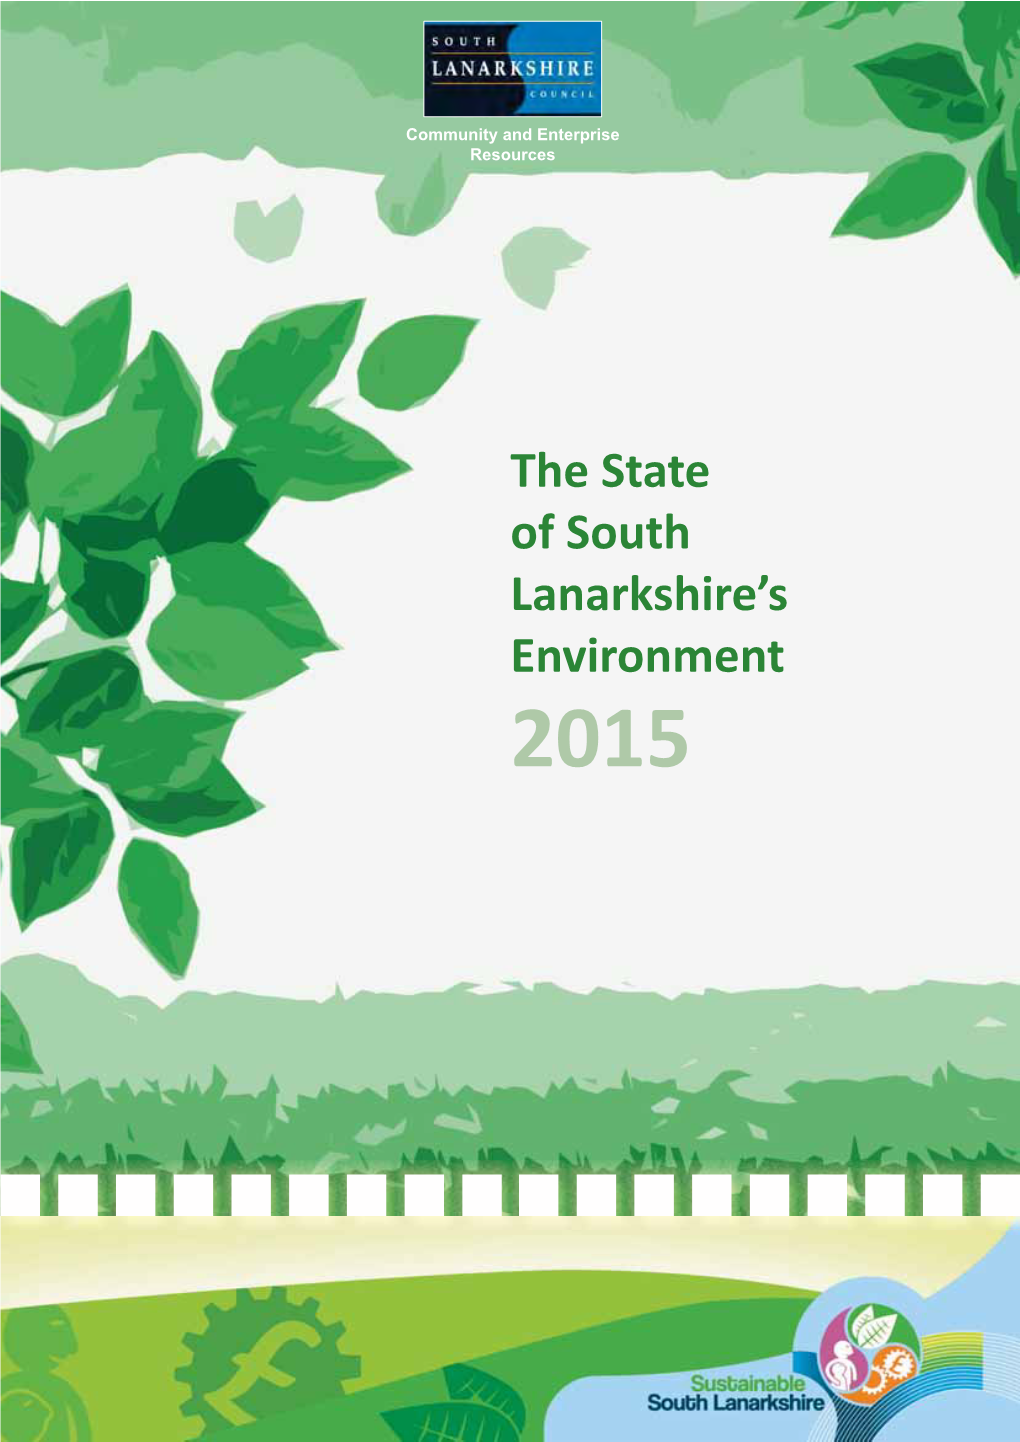 The State of South Lanarkshire's Environment 2015